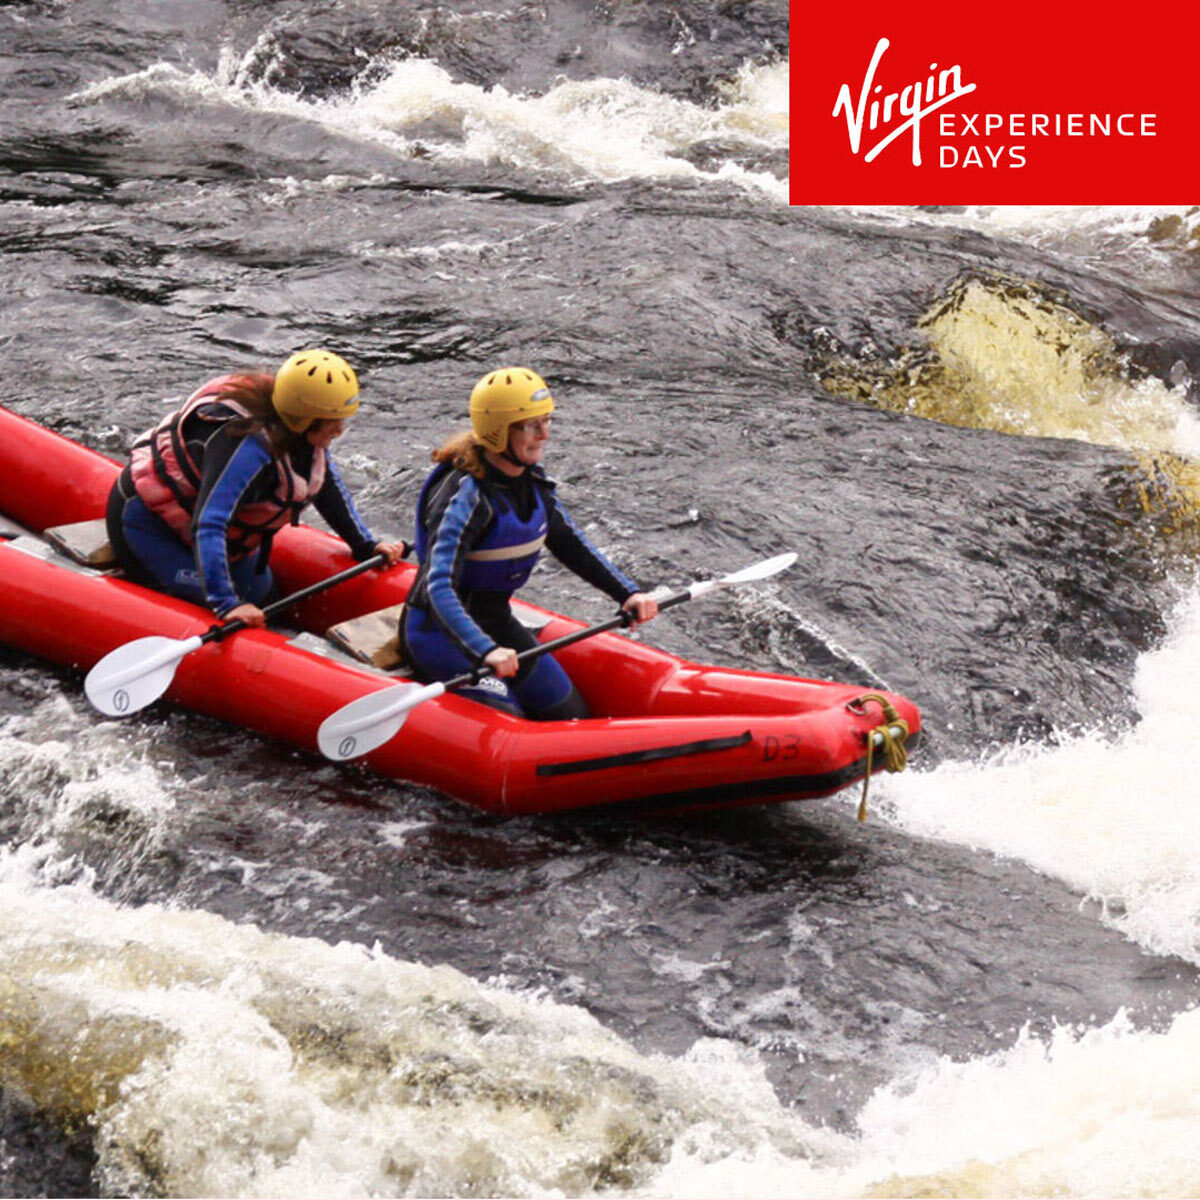 Buy Virgin Experience White Water Rafting for 2 Image3 at Costco.co.uk